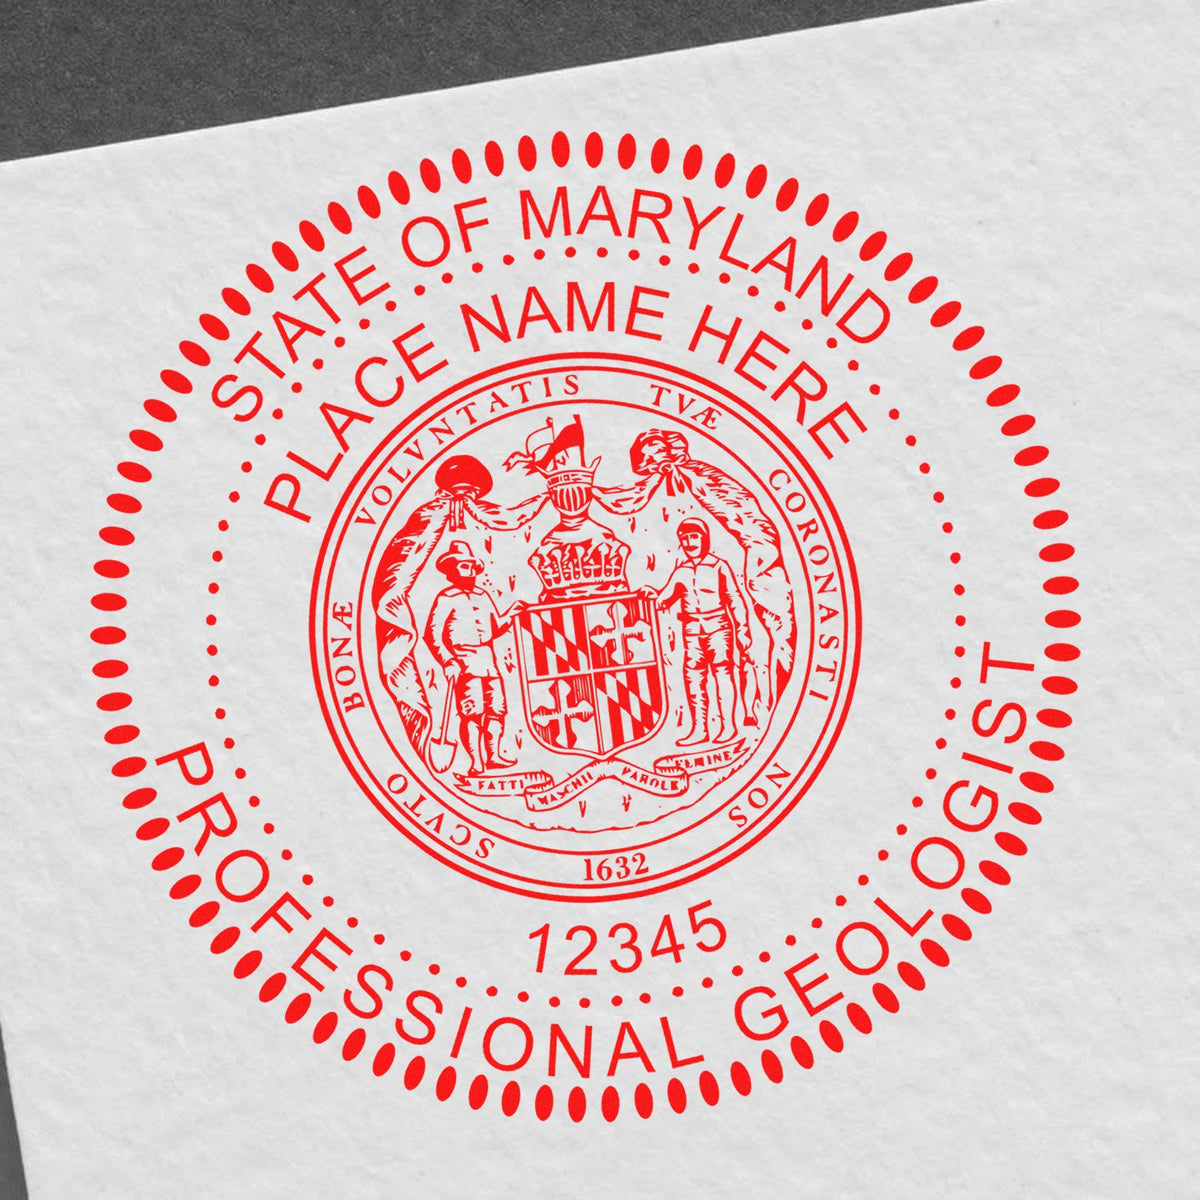 An in use photo of the Maryland Professional Geologist Seal Stamp showing a sample imprint on a cardstock